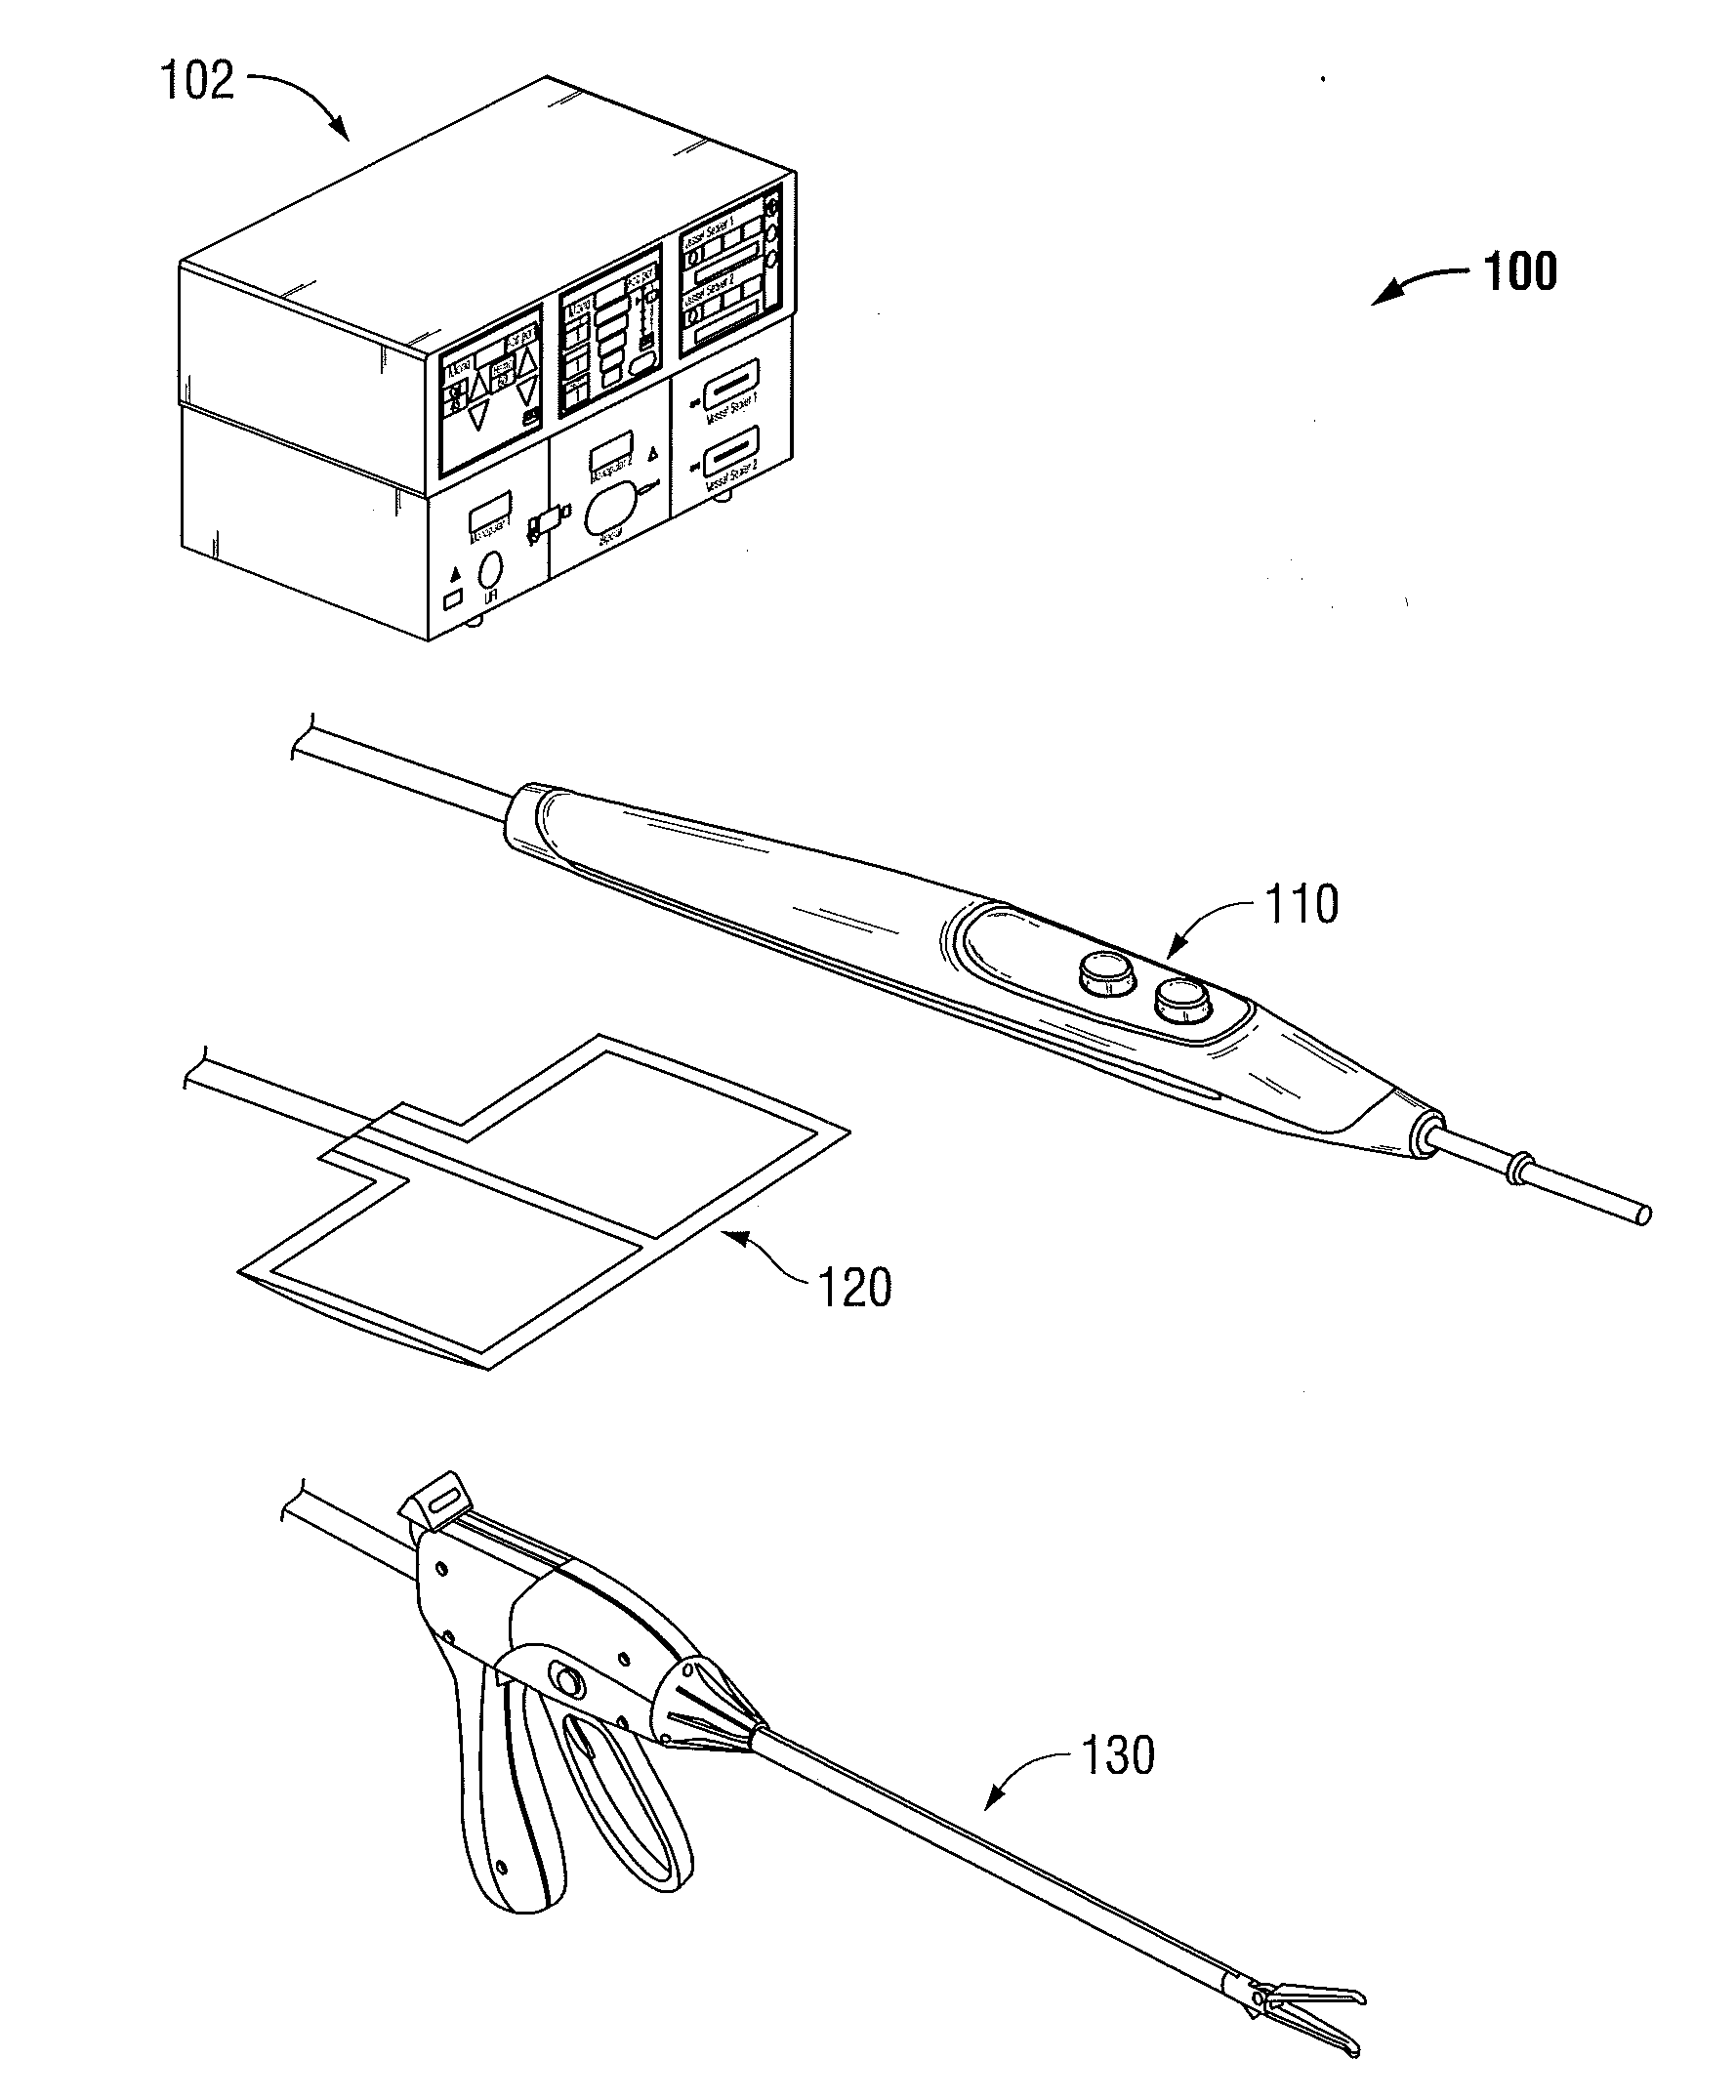 Systems and methods for generating electrosurgical energy using a multistage power converter